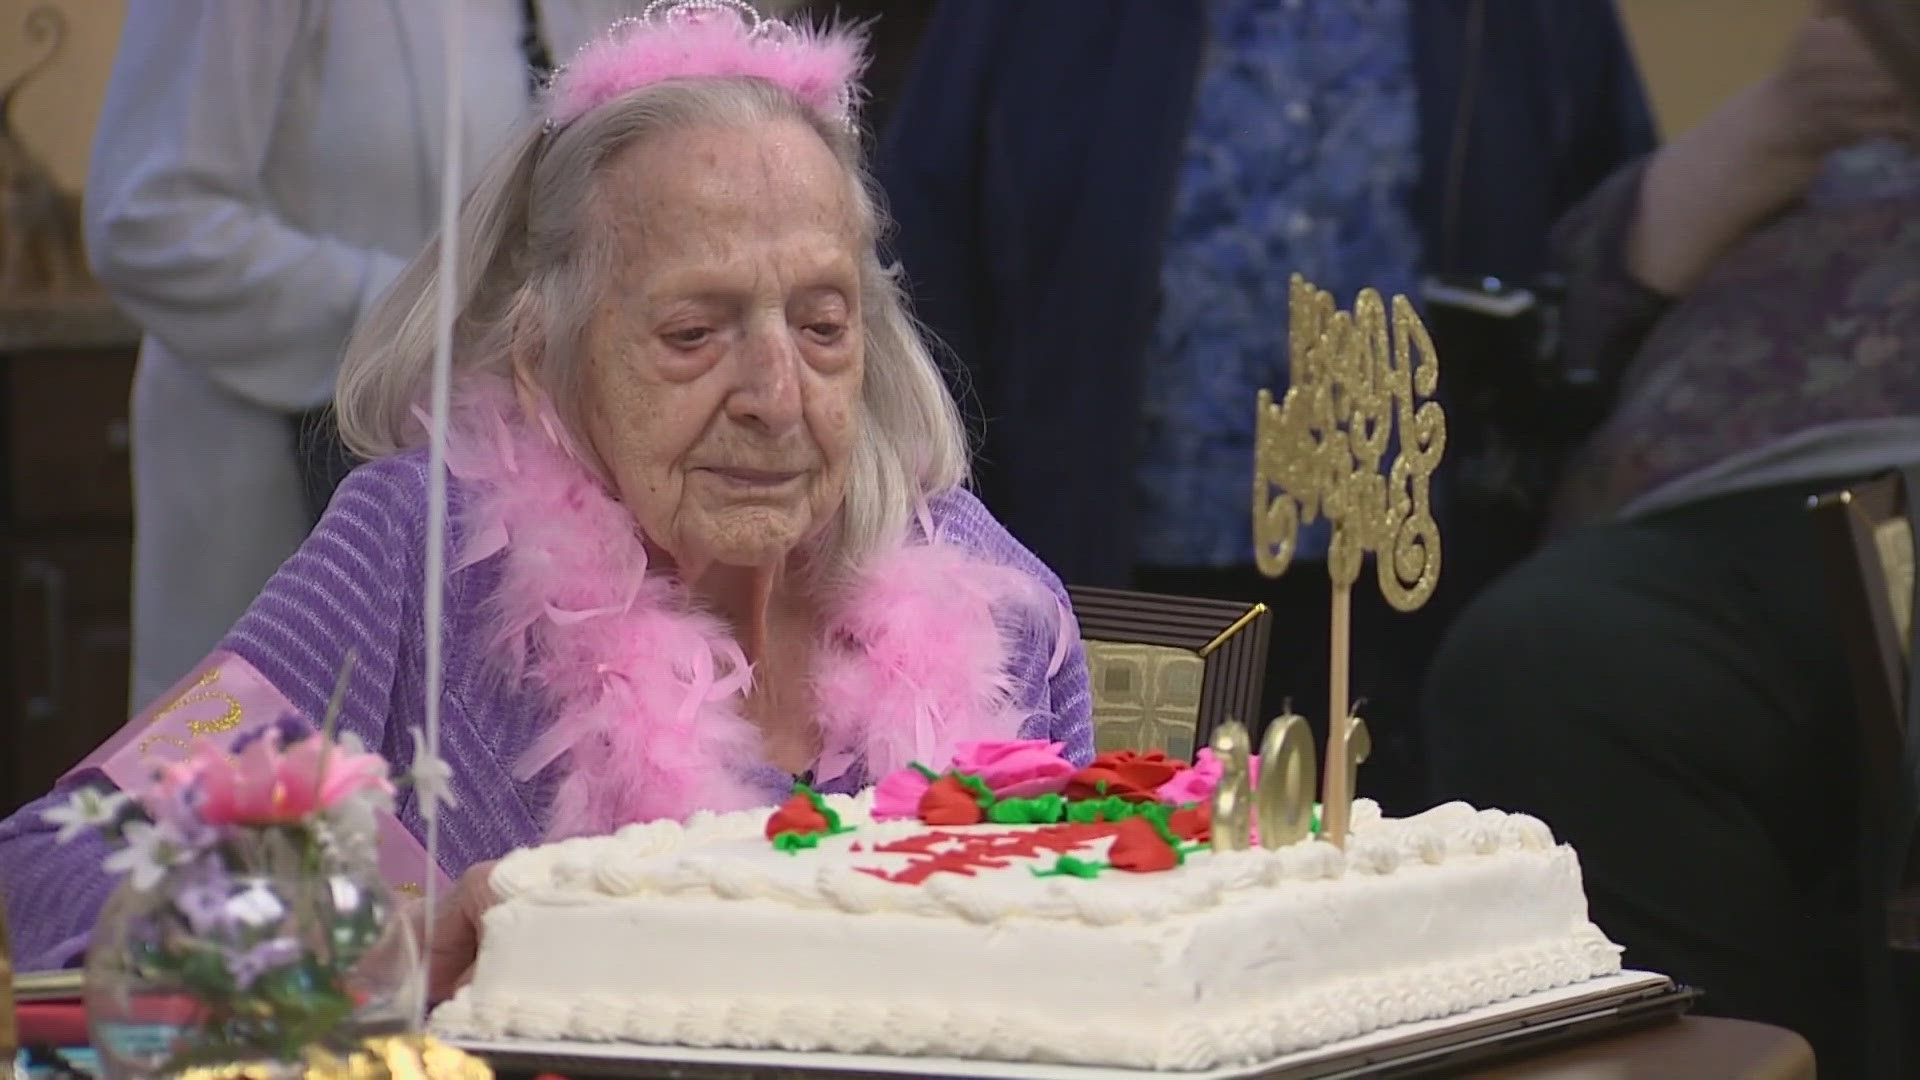 Tina celebrated her 106th birthday with friends and family on Friday, April 19. Her secret to longevity? "Be nice."